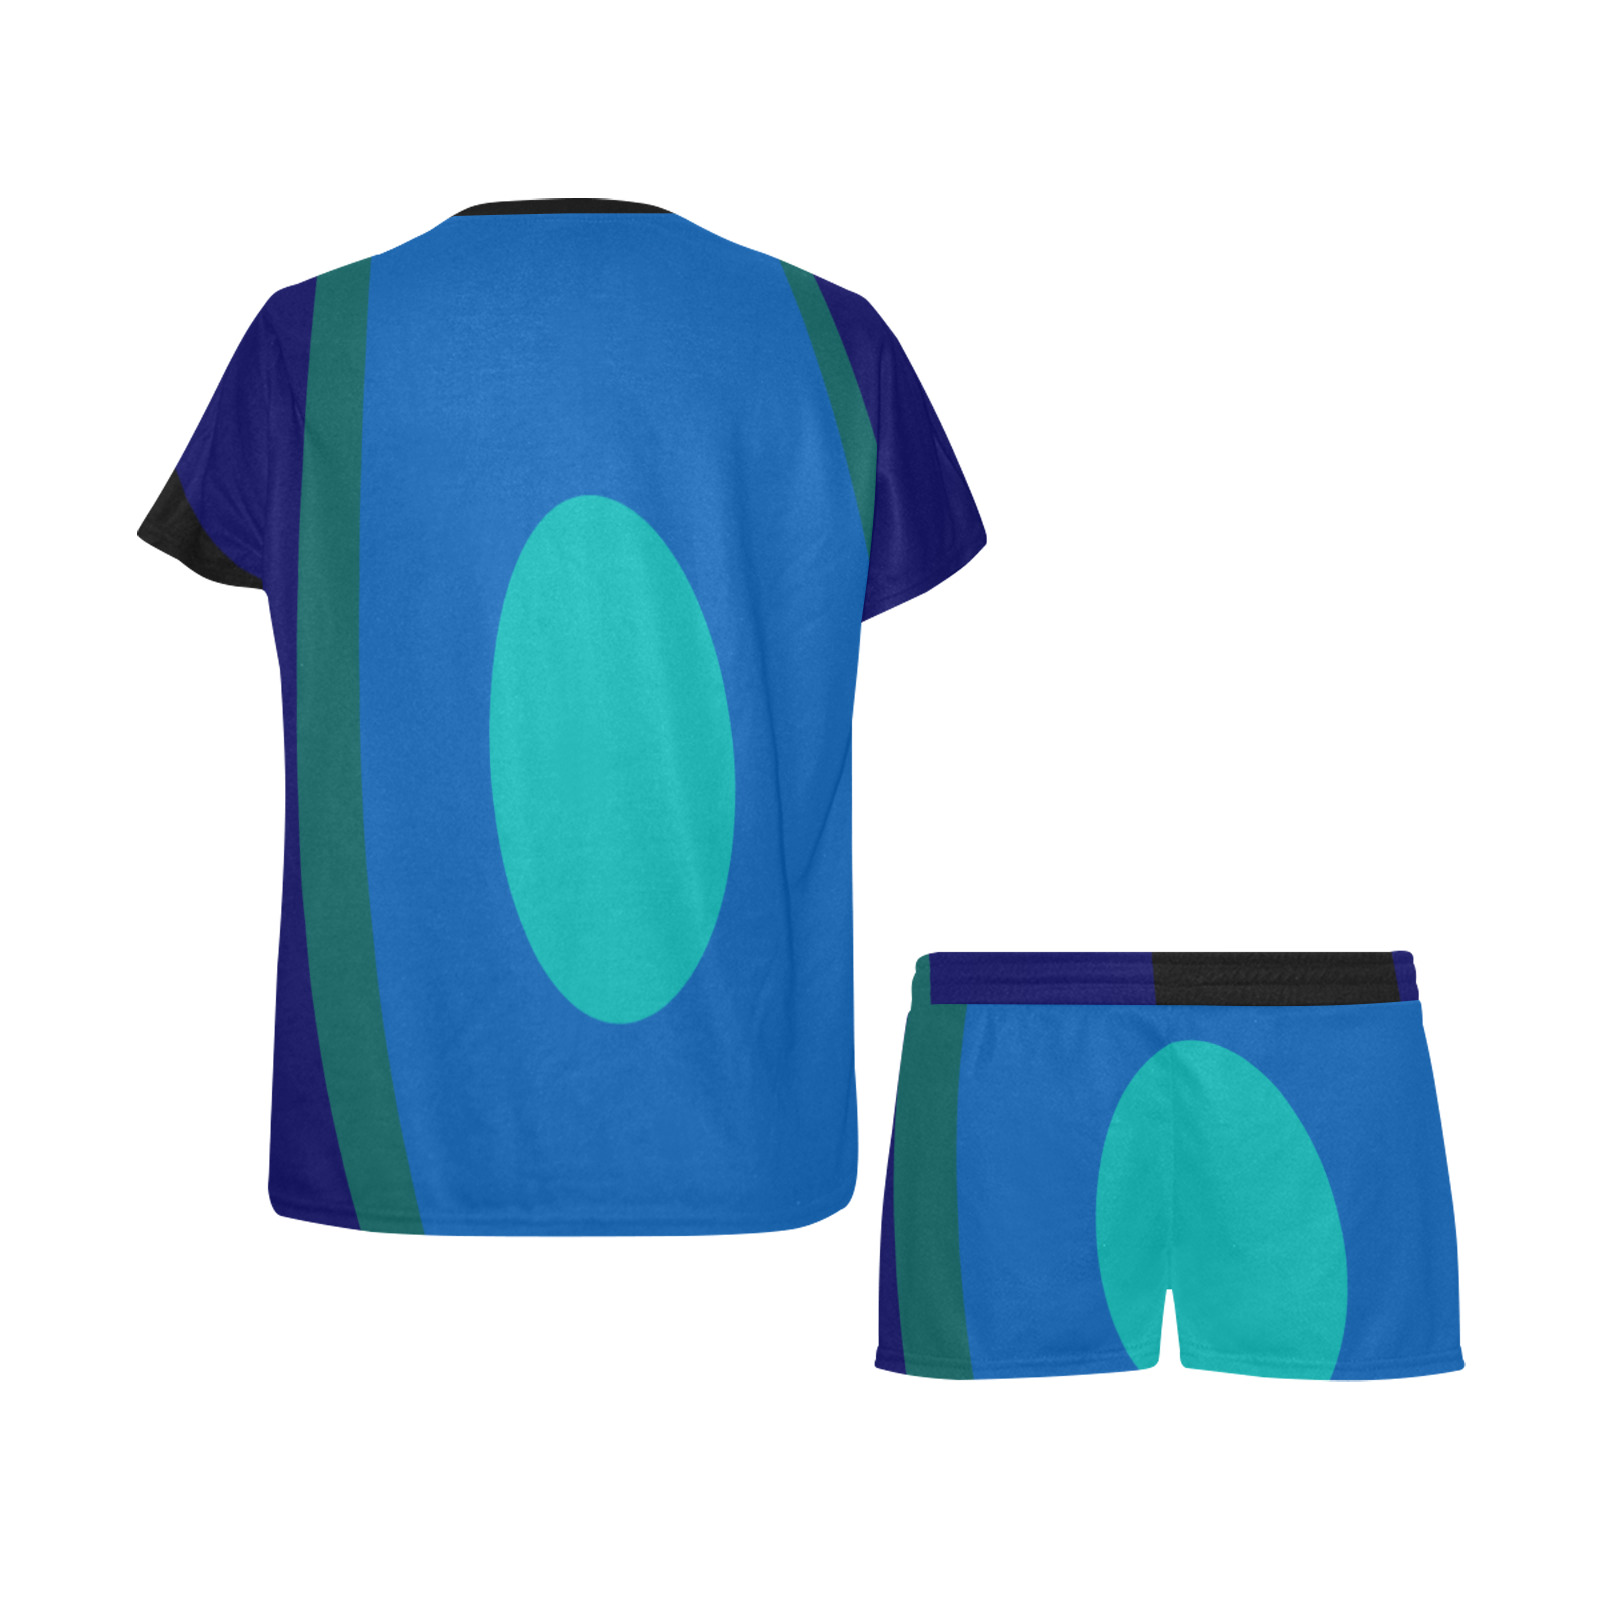 Dimensional Blue Abstract 915 Women's Short Pajama Set